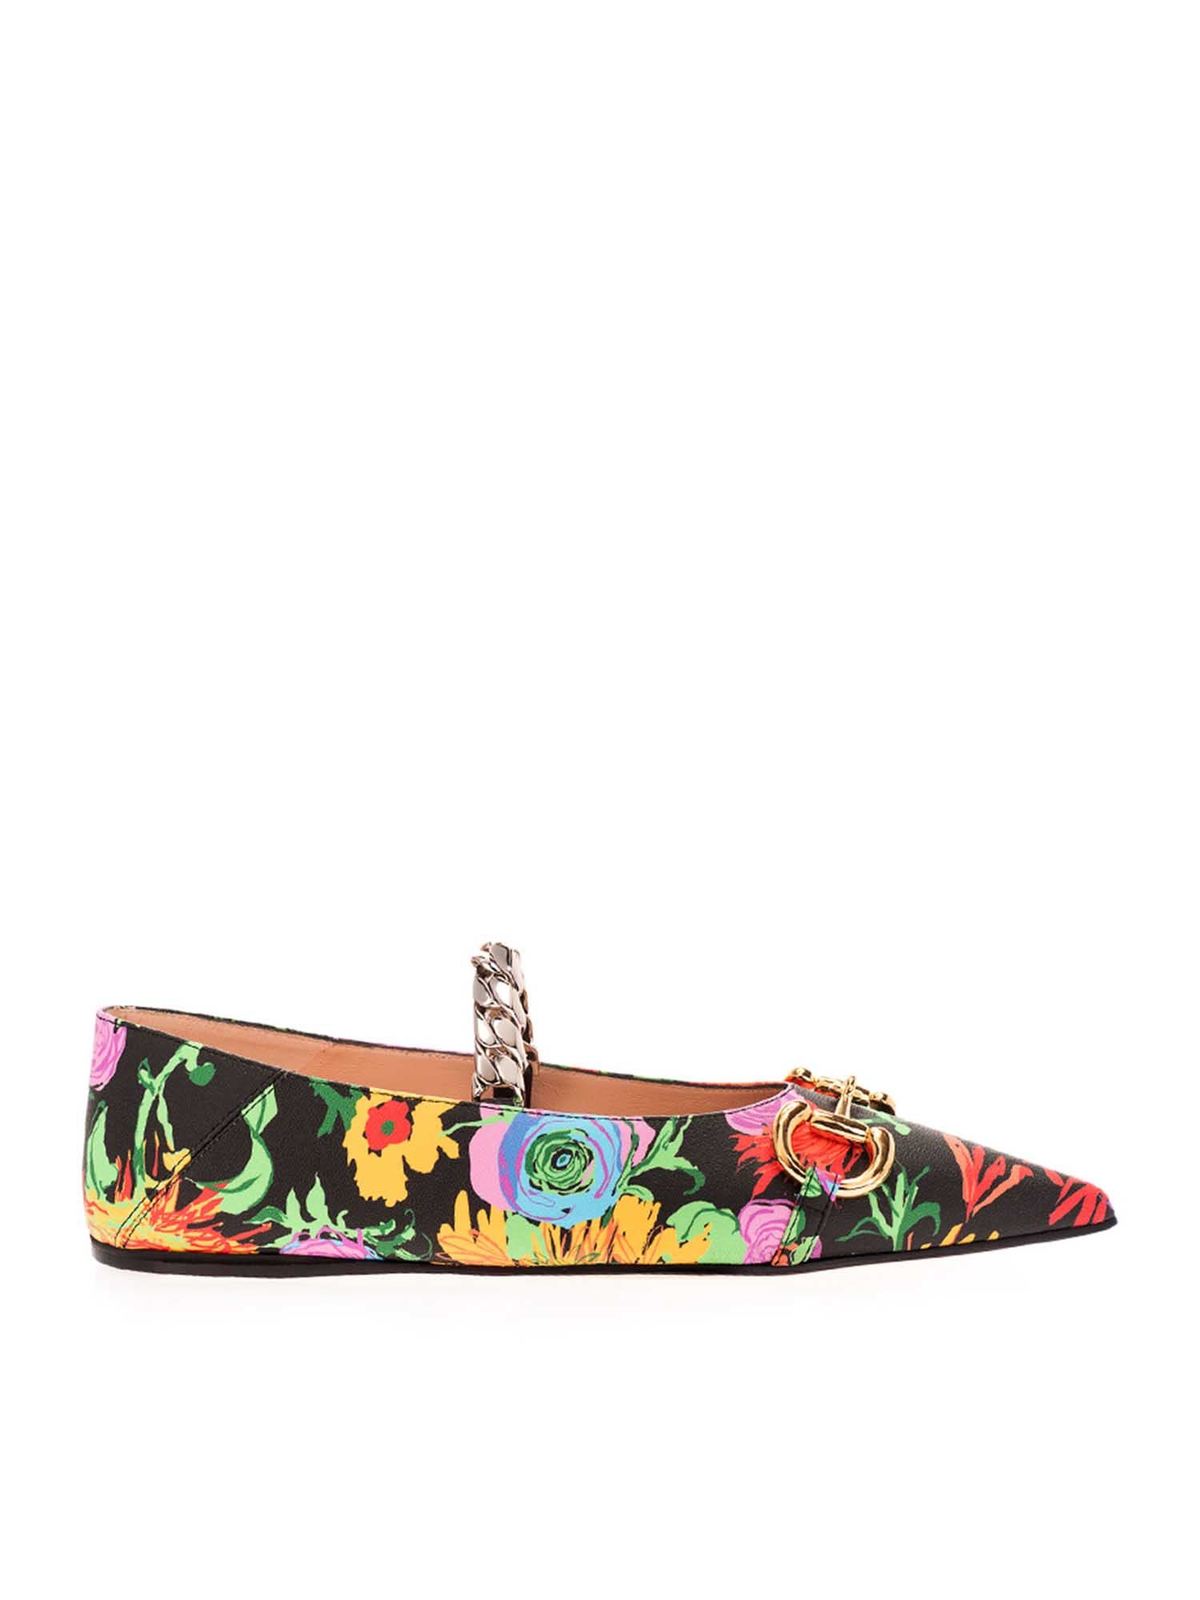 Gucci FLORAL PRINT CHAIN BALLET FLATS IN BLACK